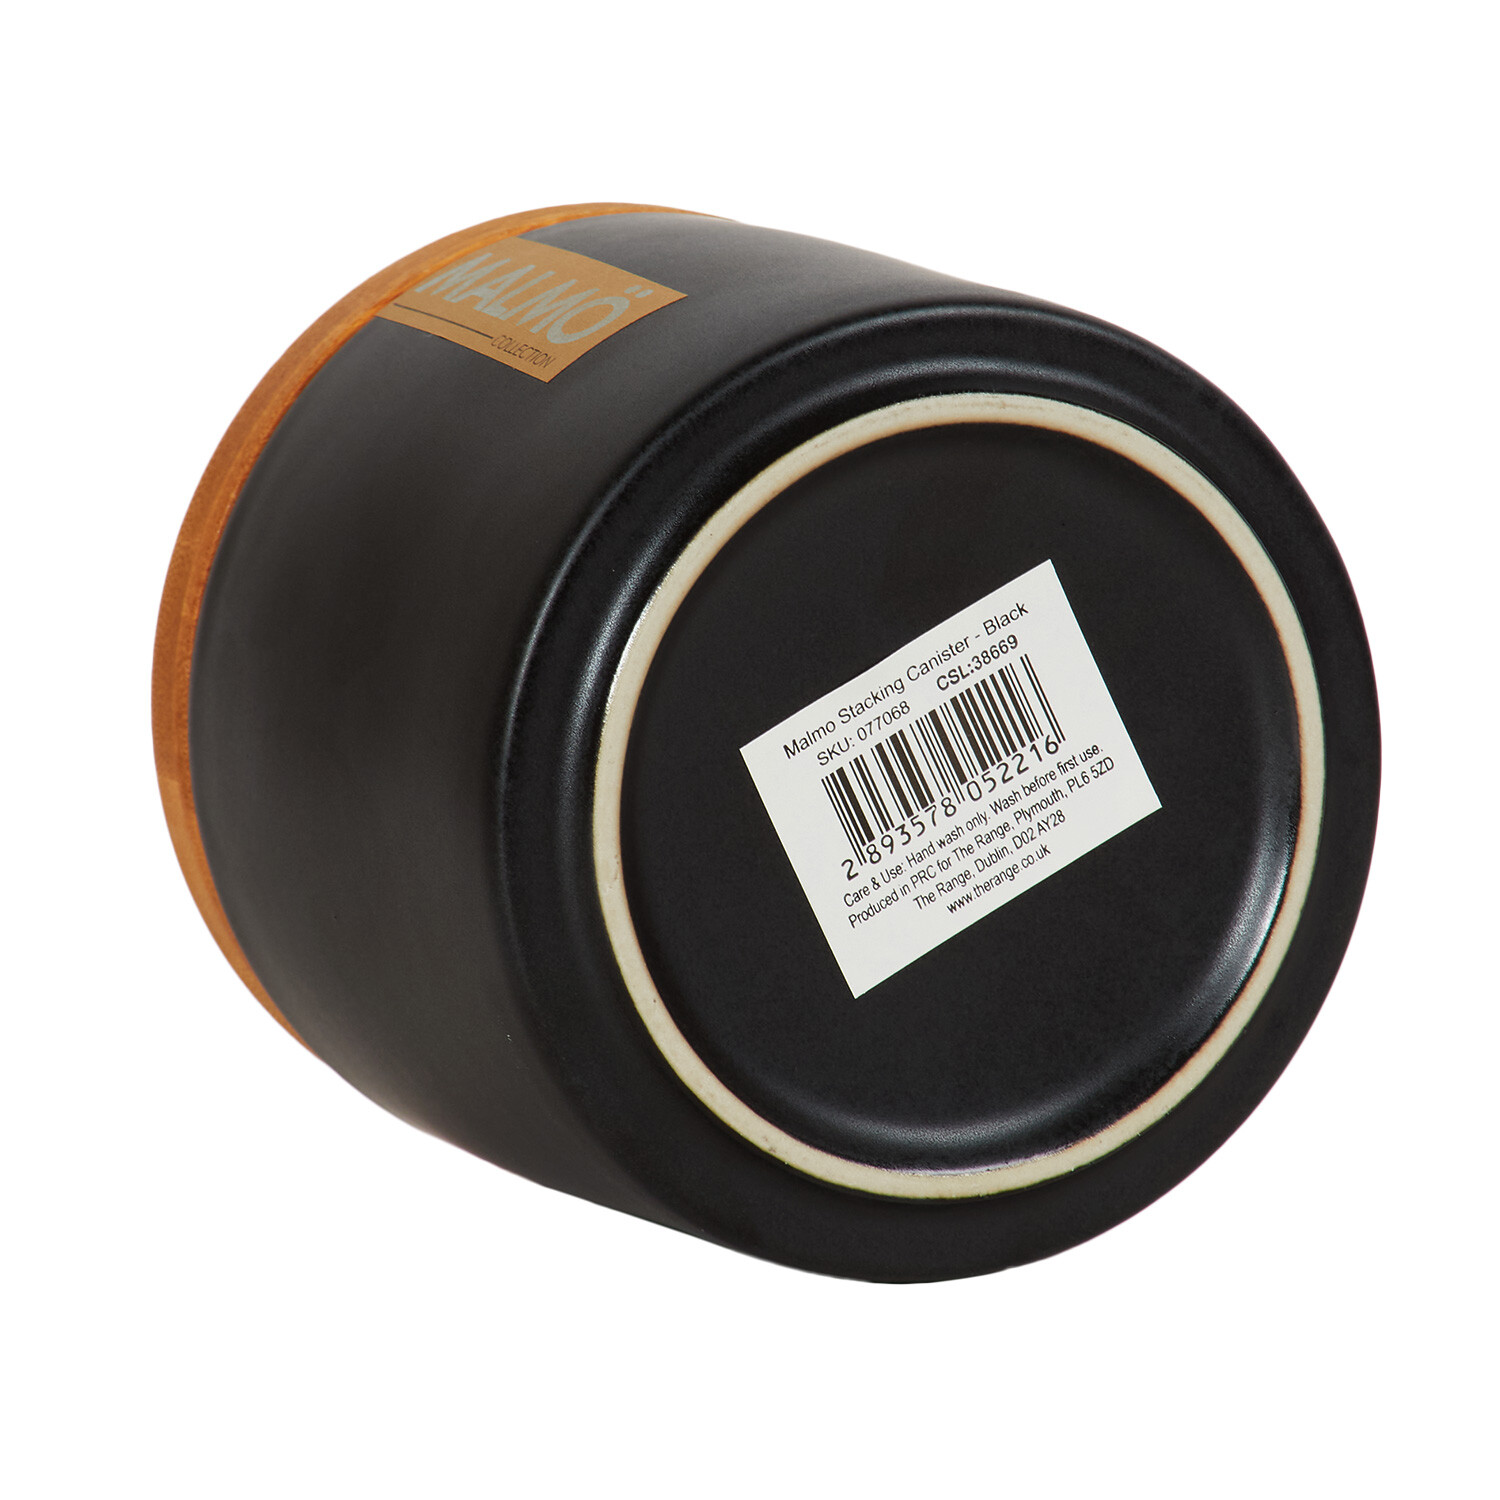 Malmo Stacking Canister - Black Image 5